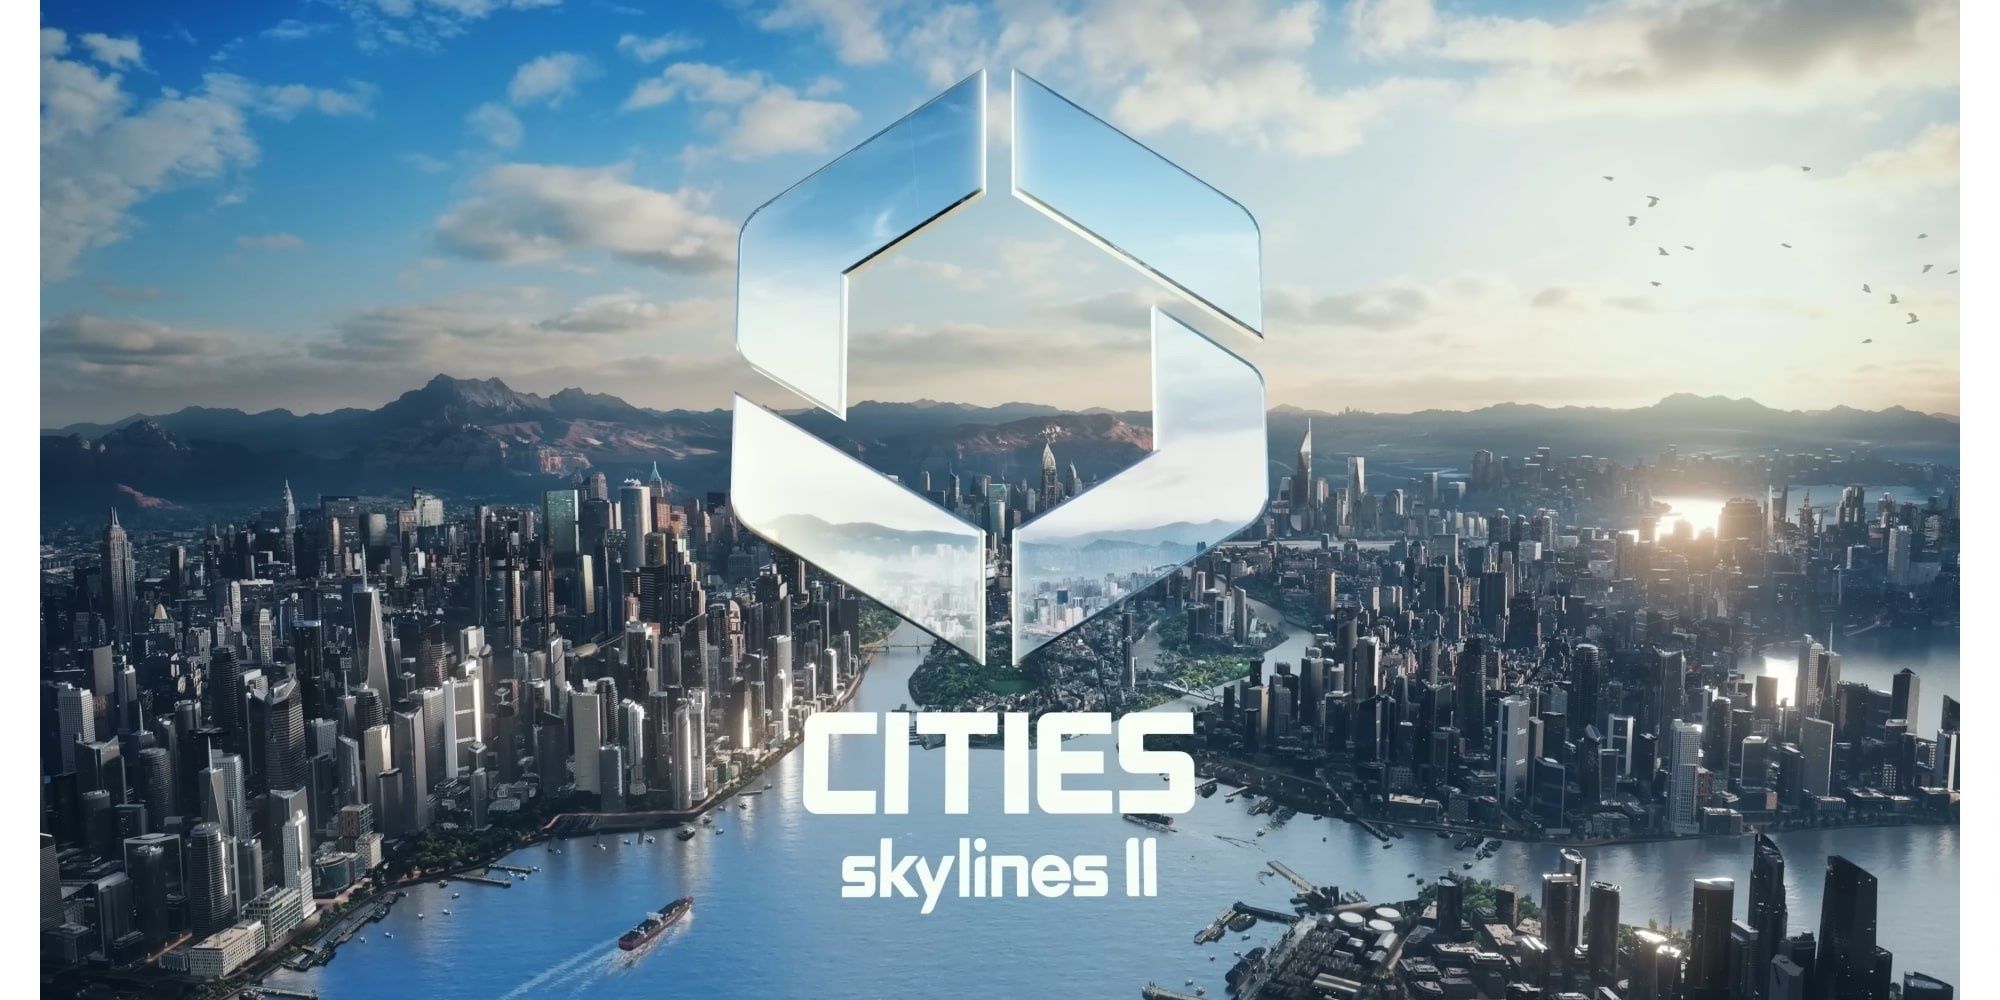 Cities Skylines 2 Features We'd Love To See